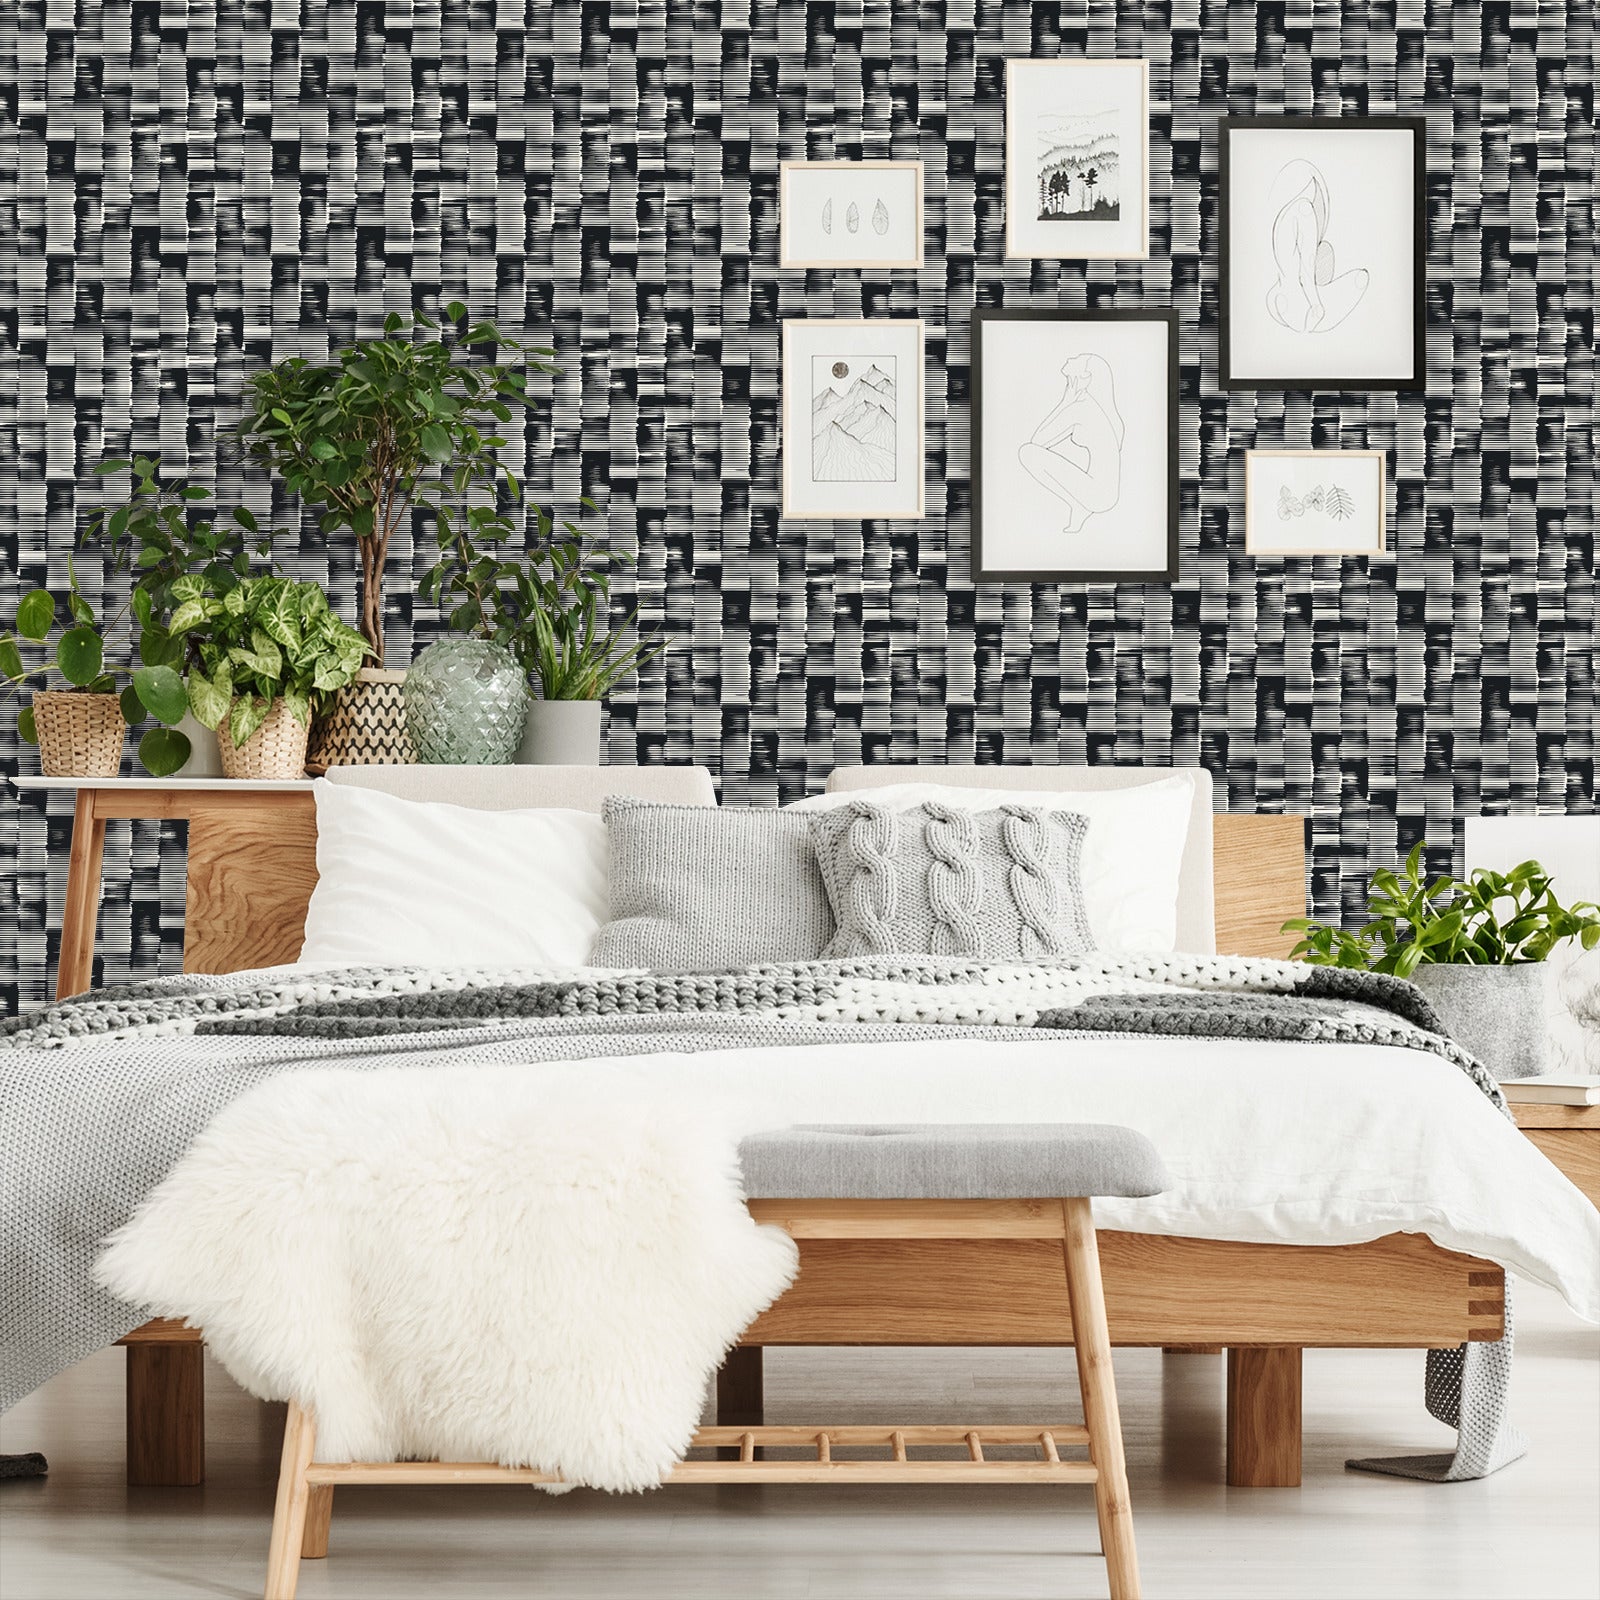 18' L x 24" W Peel & Stick Wallpaper Roll - Black & White Abstract Ink Pattern by DecoWorks - Wallpaper - Americanflat